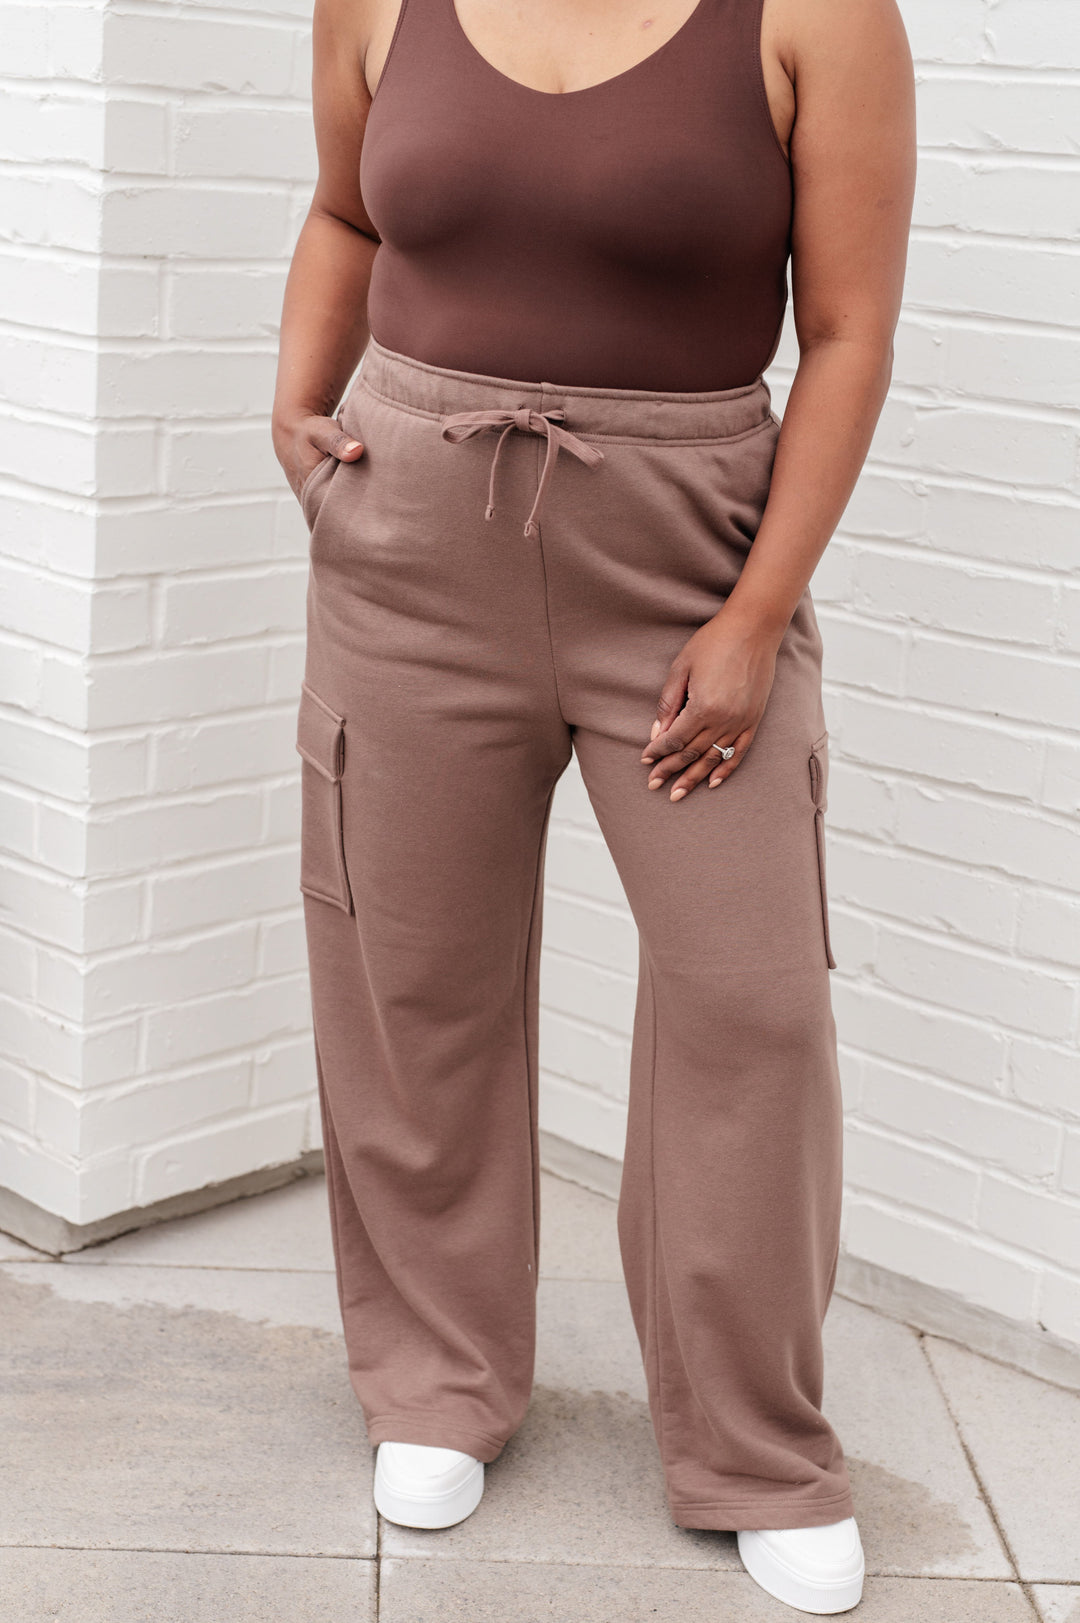 Run, Don't Walk Cargo Sweatpants in Smokey Brown-Pants-Inspired by Justeen-Women's Clothing Boutique in Chicago, Illinois